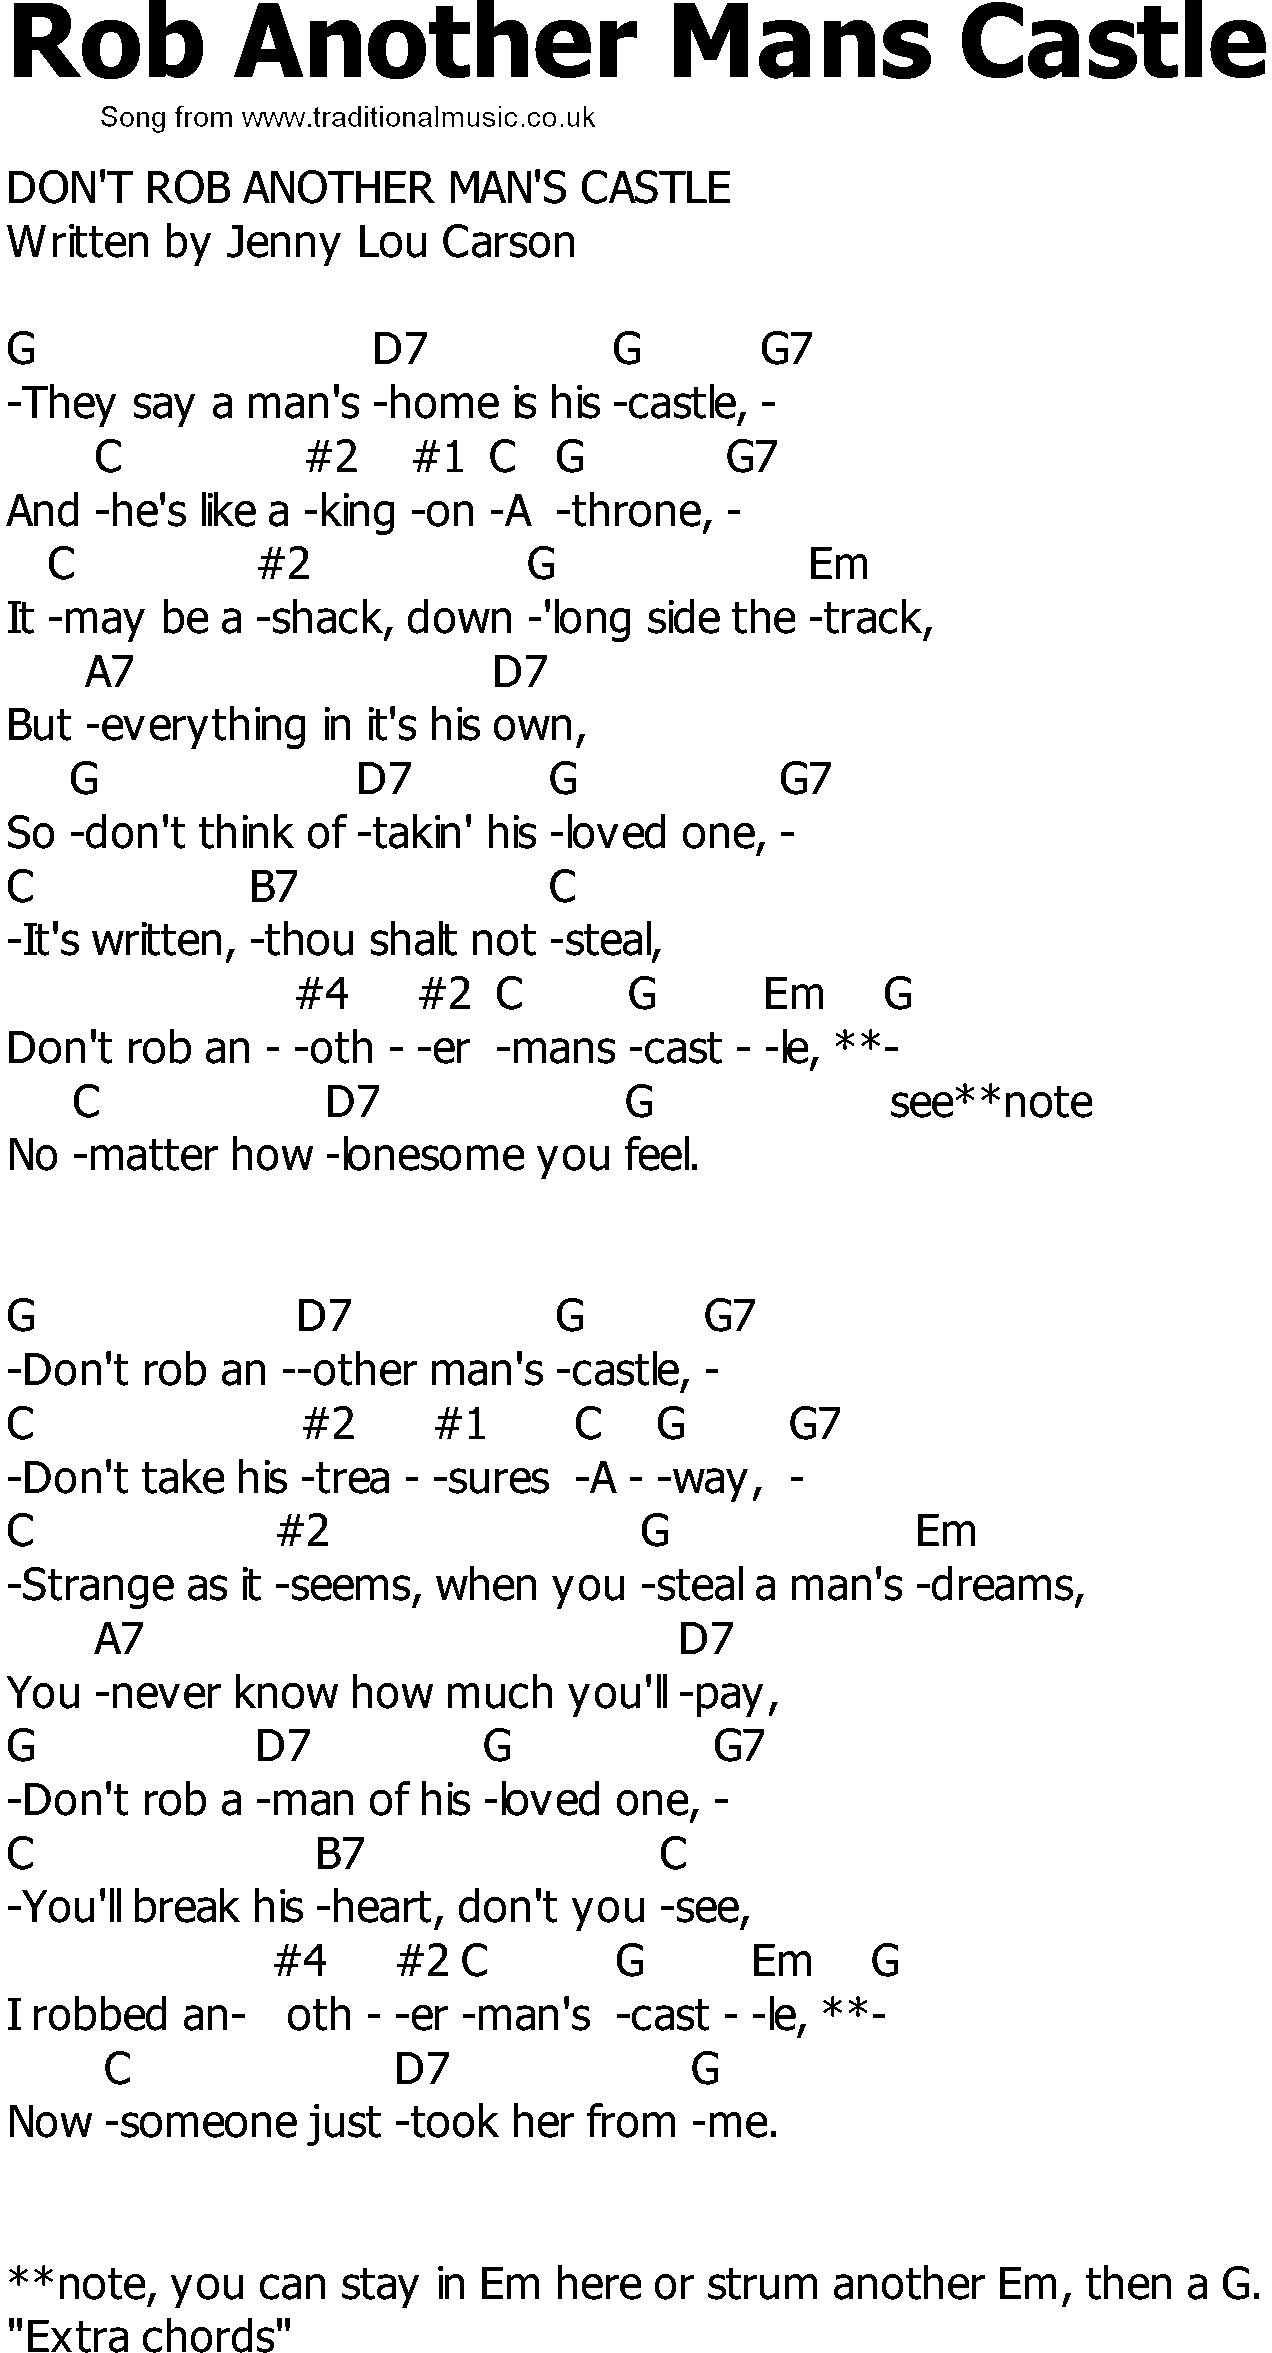 Old Country song lyrics with chords - Rob Another Mans Castle